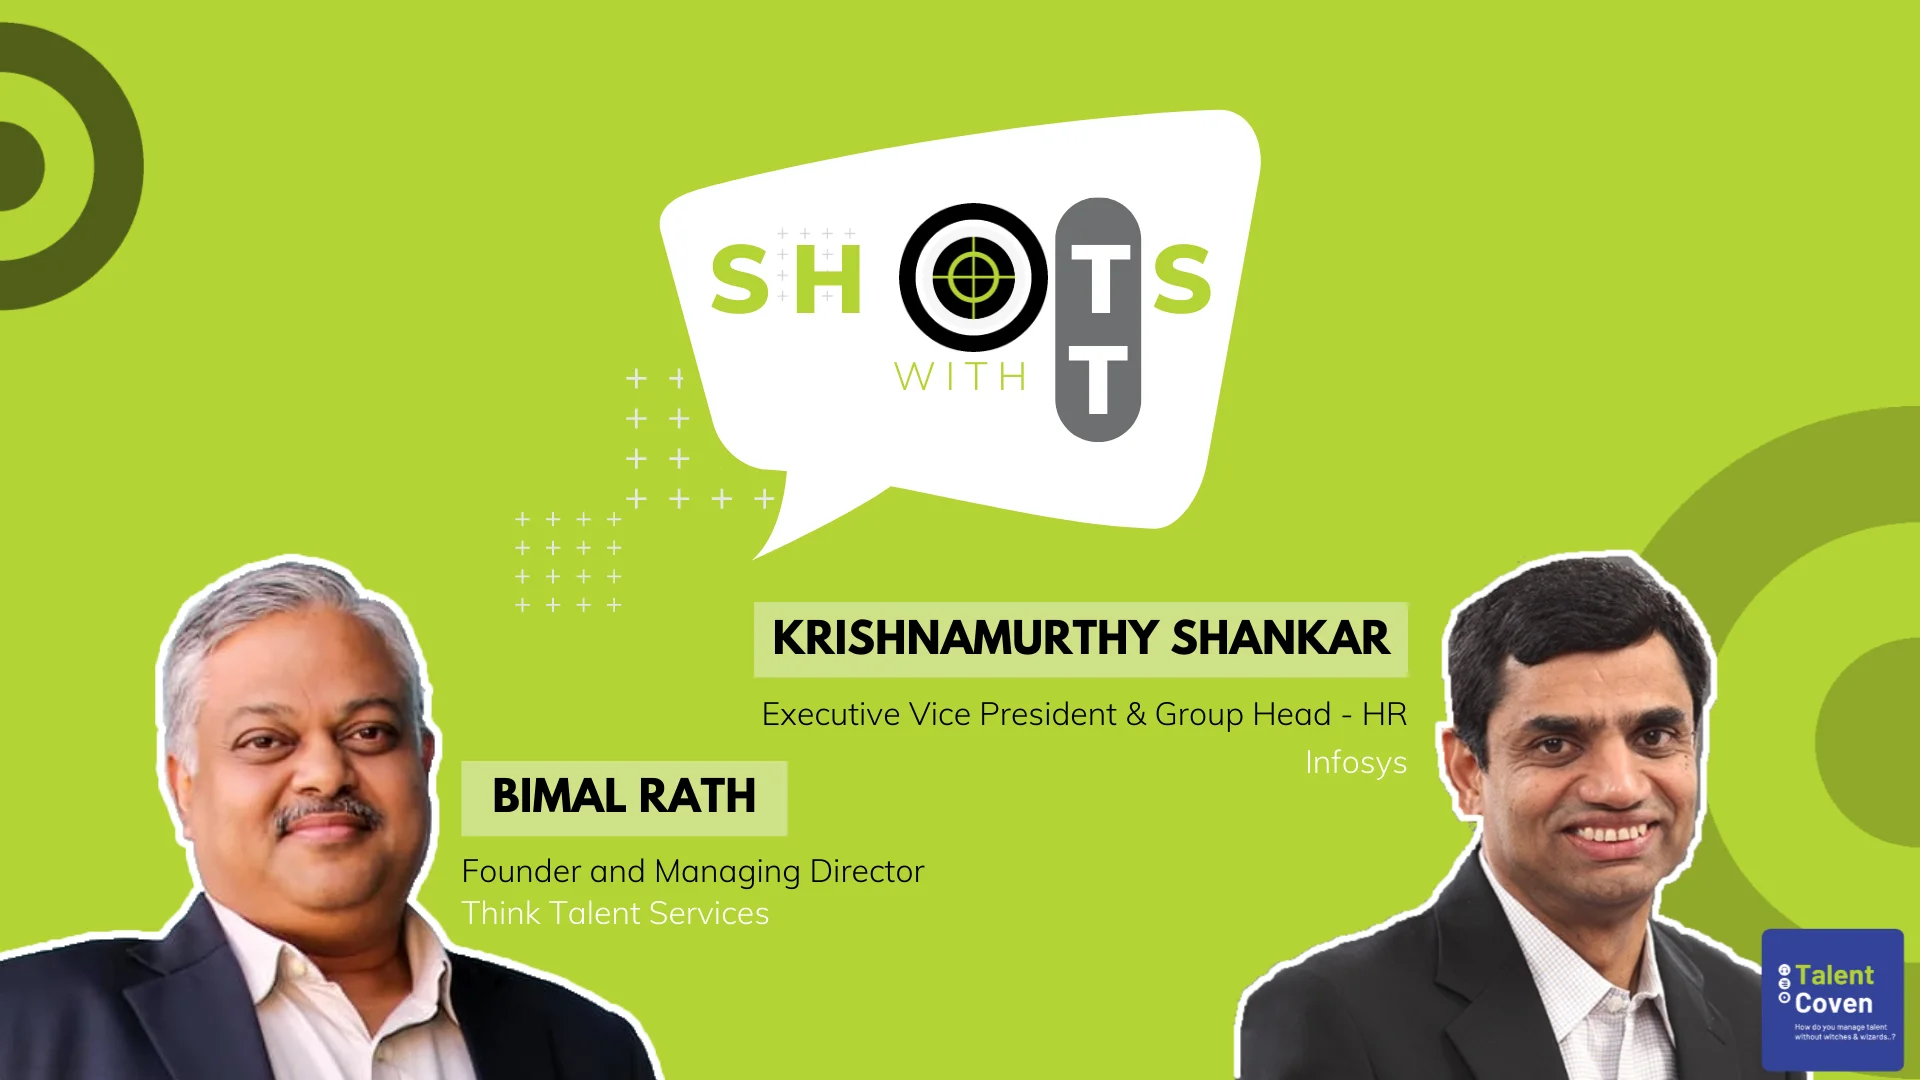 Podcast episode cover featuring Krishnamurthy Shankar discussing Perspectives on global leadership talent